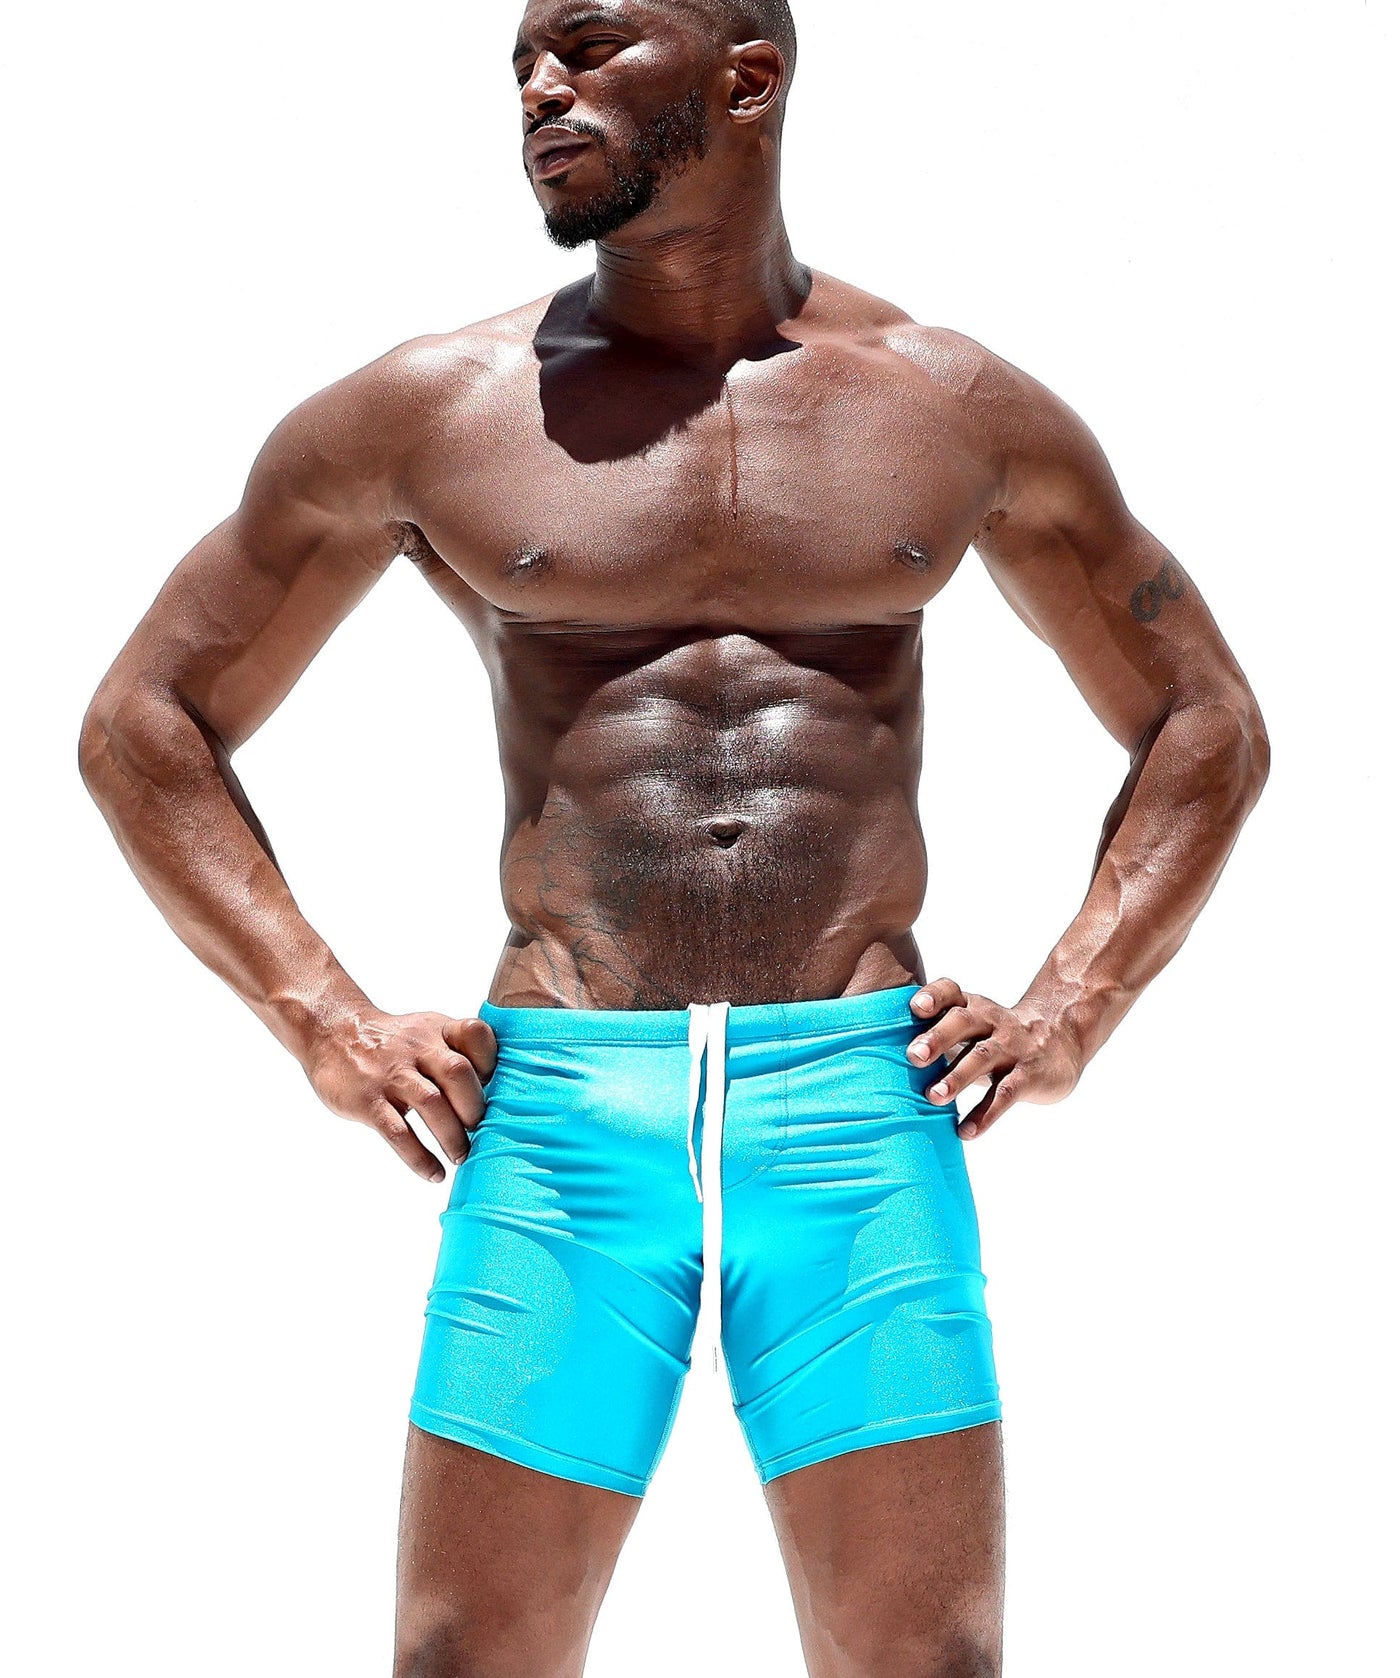 Rufskin Ziane Melrose Stretch Briefs, Since We Live in Our Underwear Now,  Here Are the 25 Best Men's Styles to Buy Online